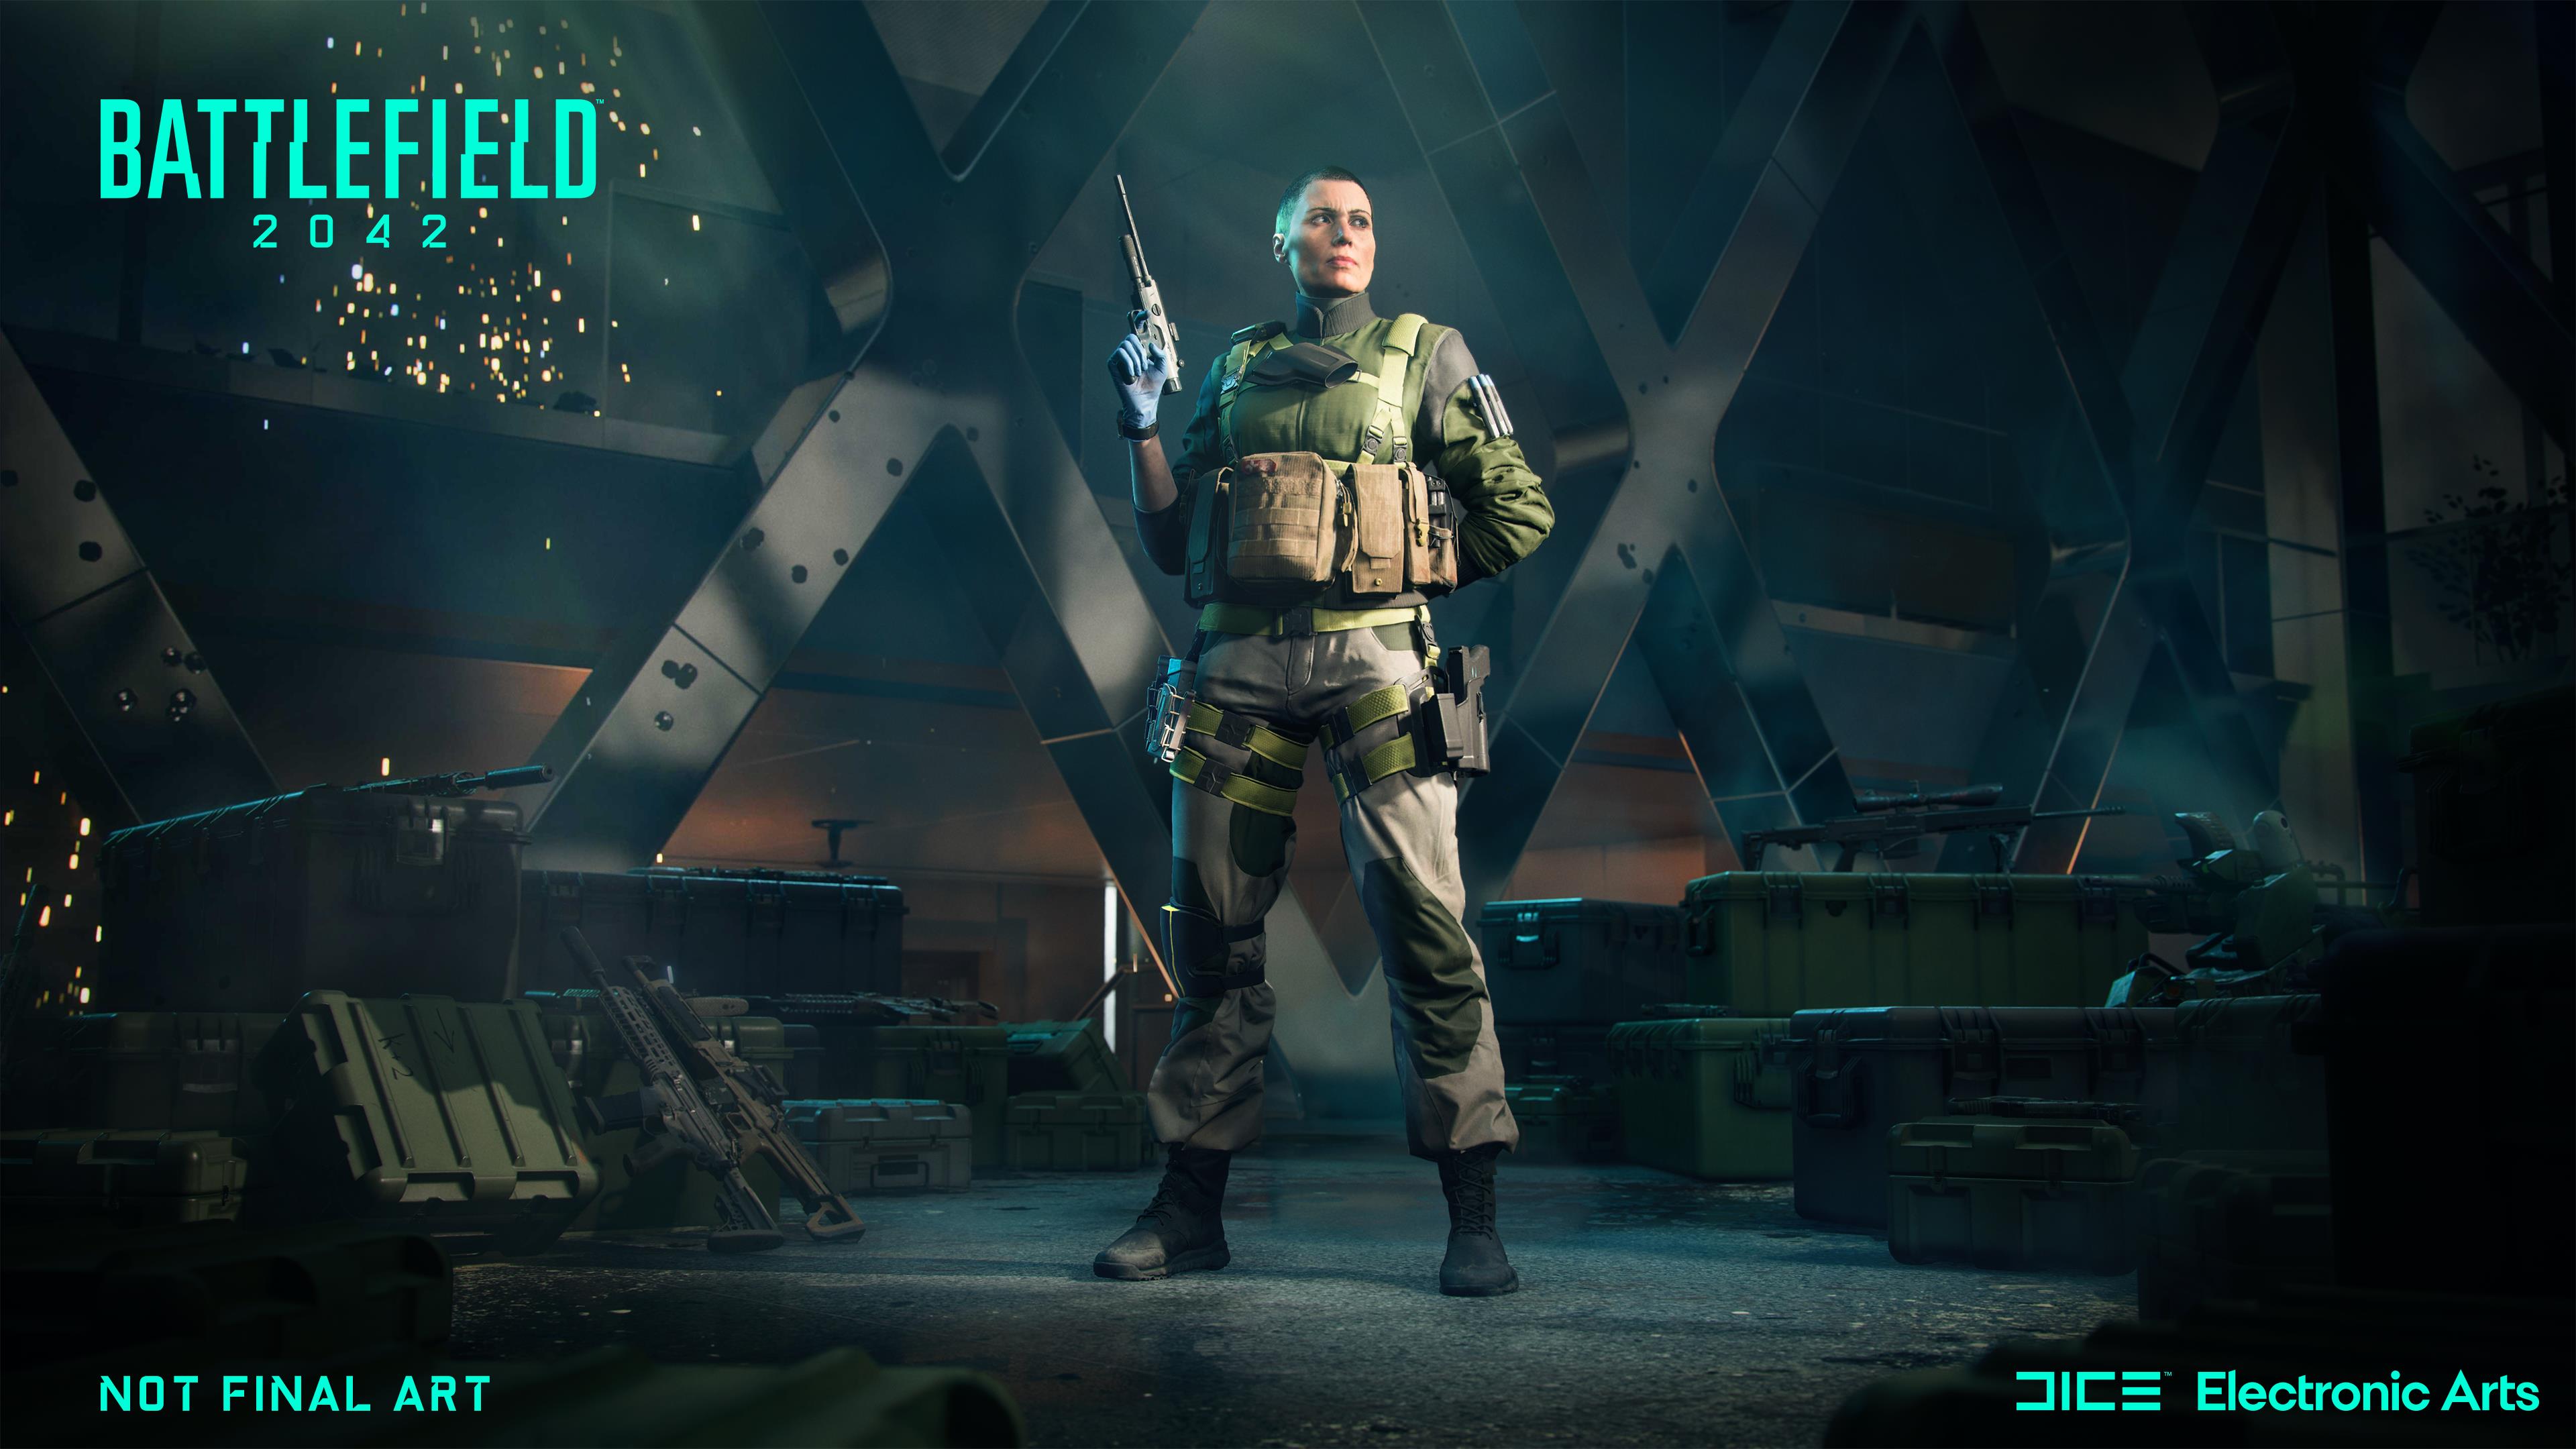 Image for Battlefield 2042 Specialists are Siege-like characters with unique abilities